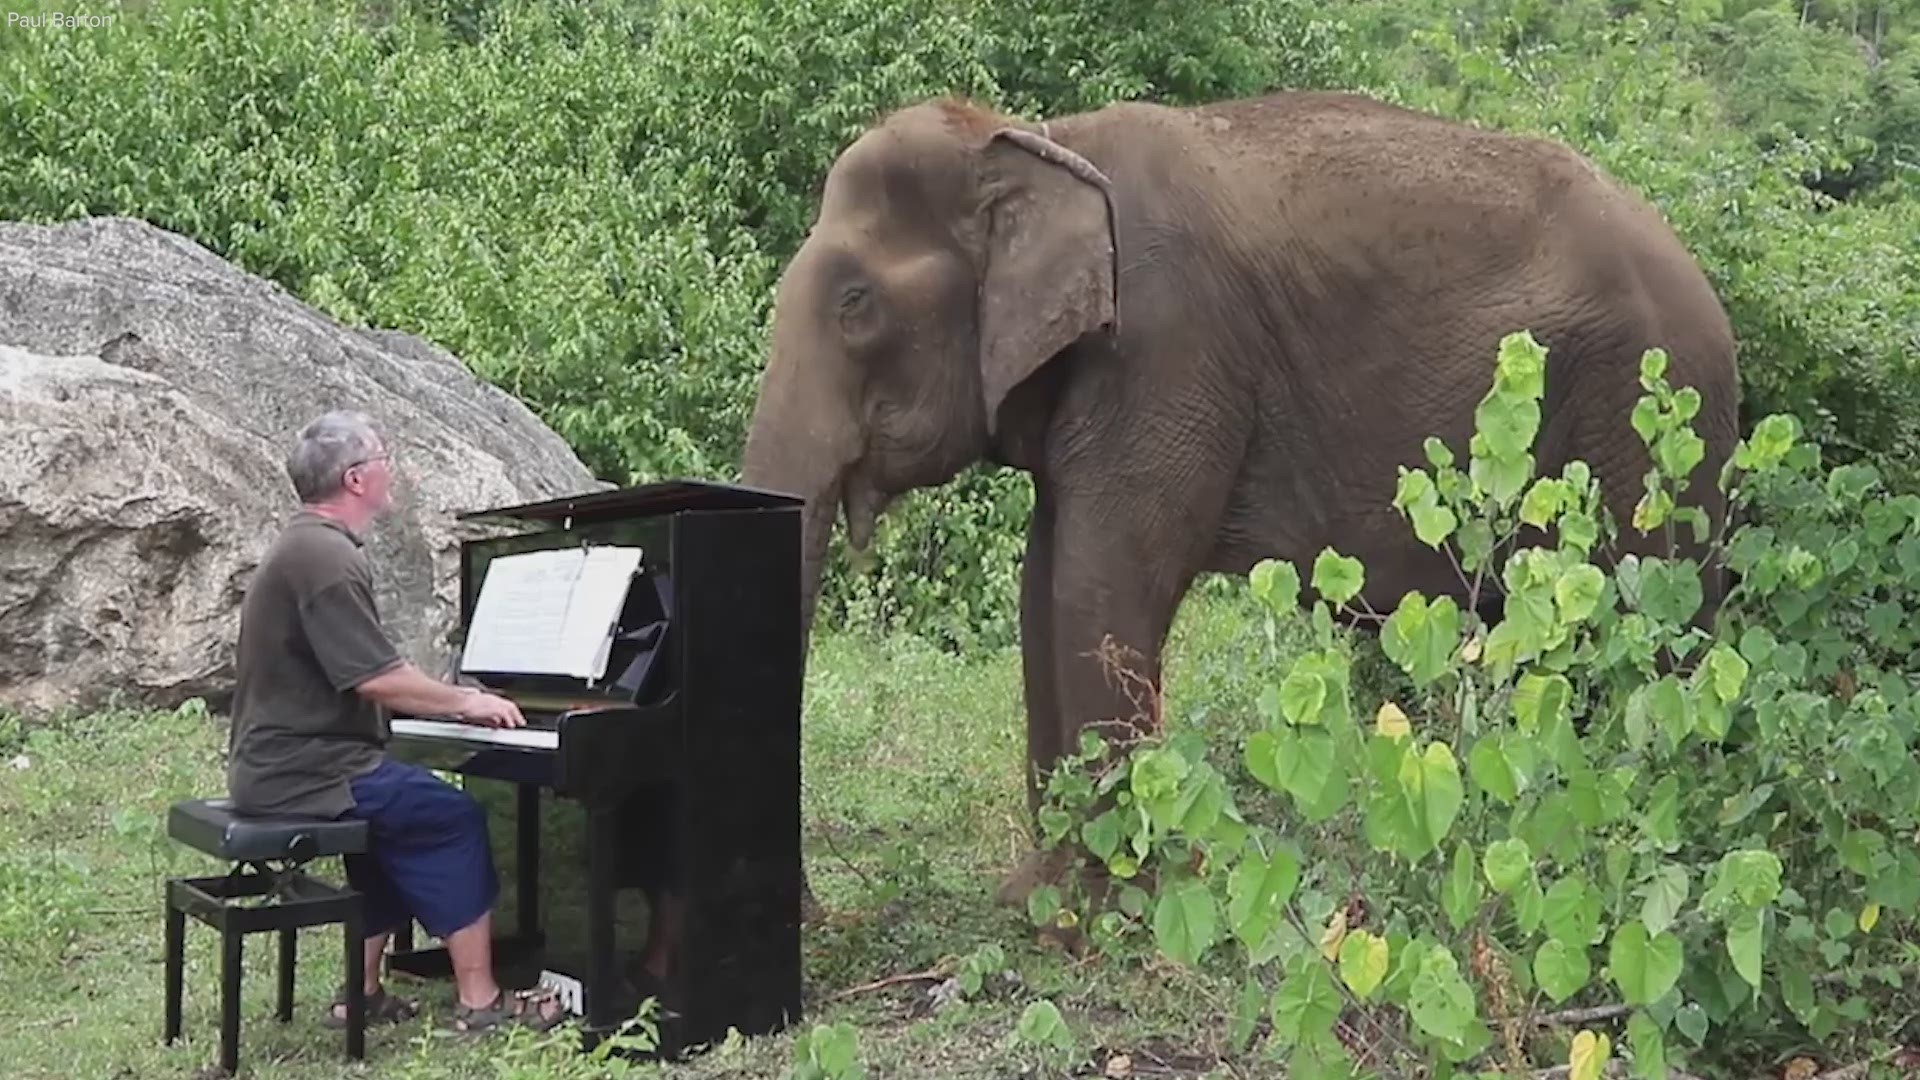 This concert pianist gives the gift of music to a one-of-a-kind audience, elephants.